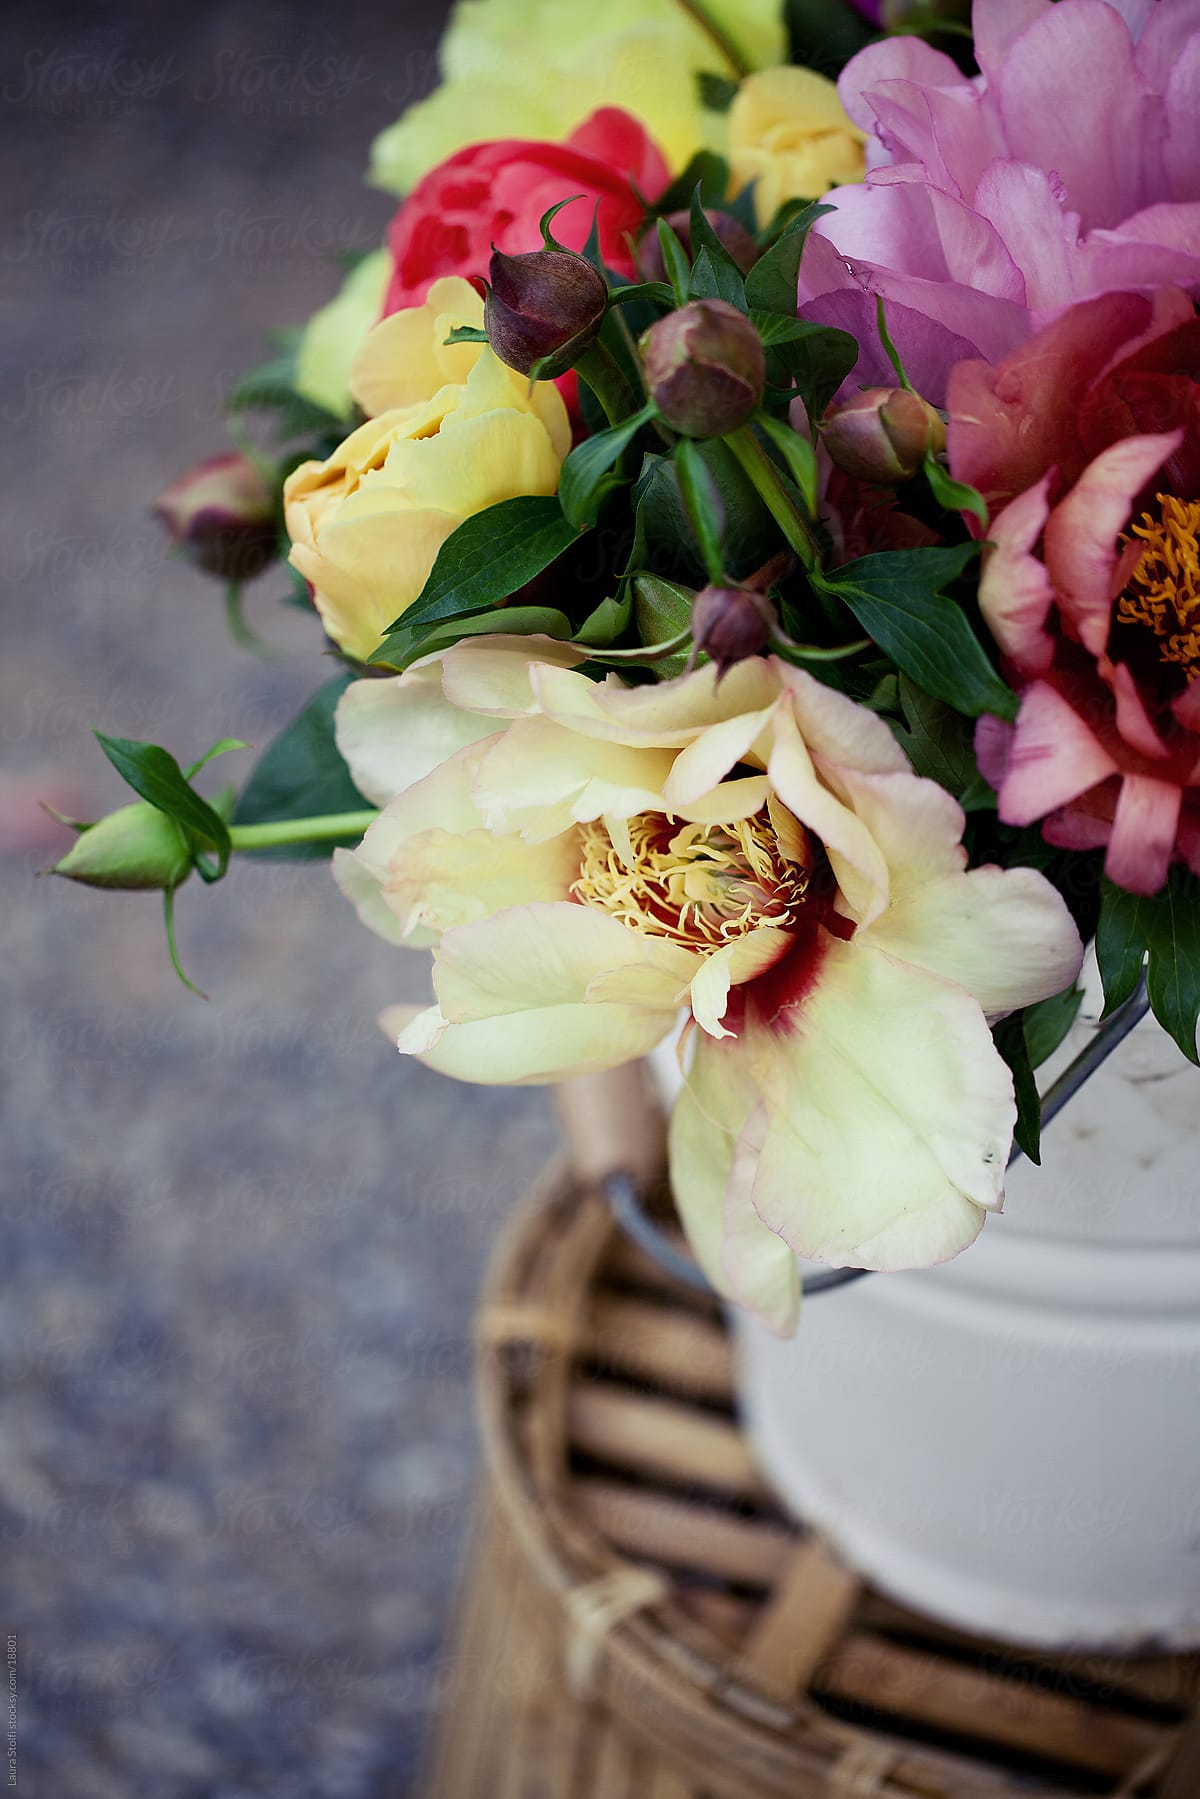 Decorating with cut peonies